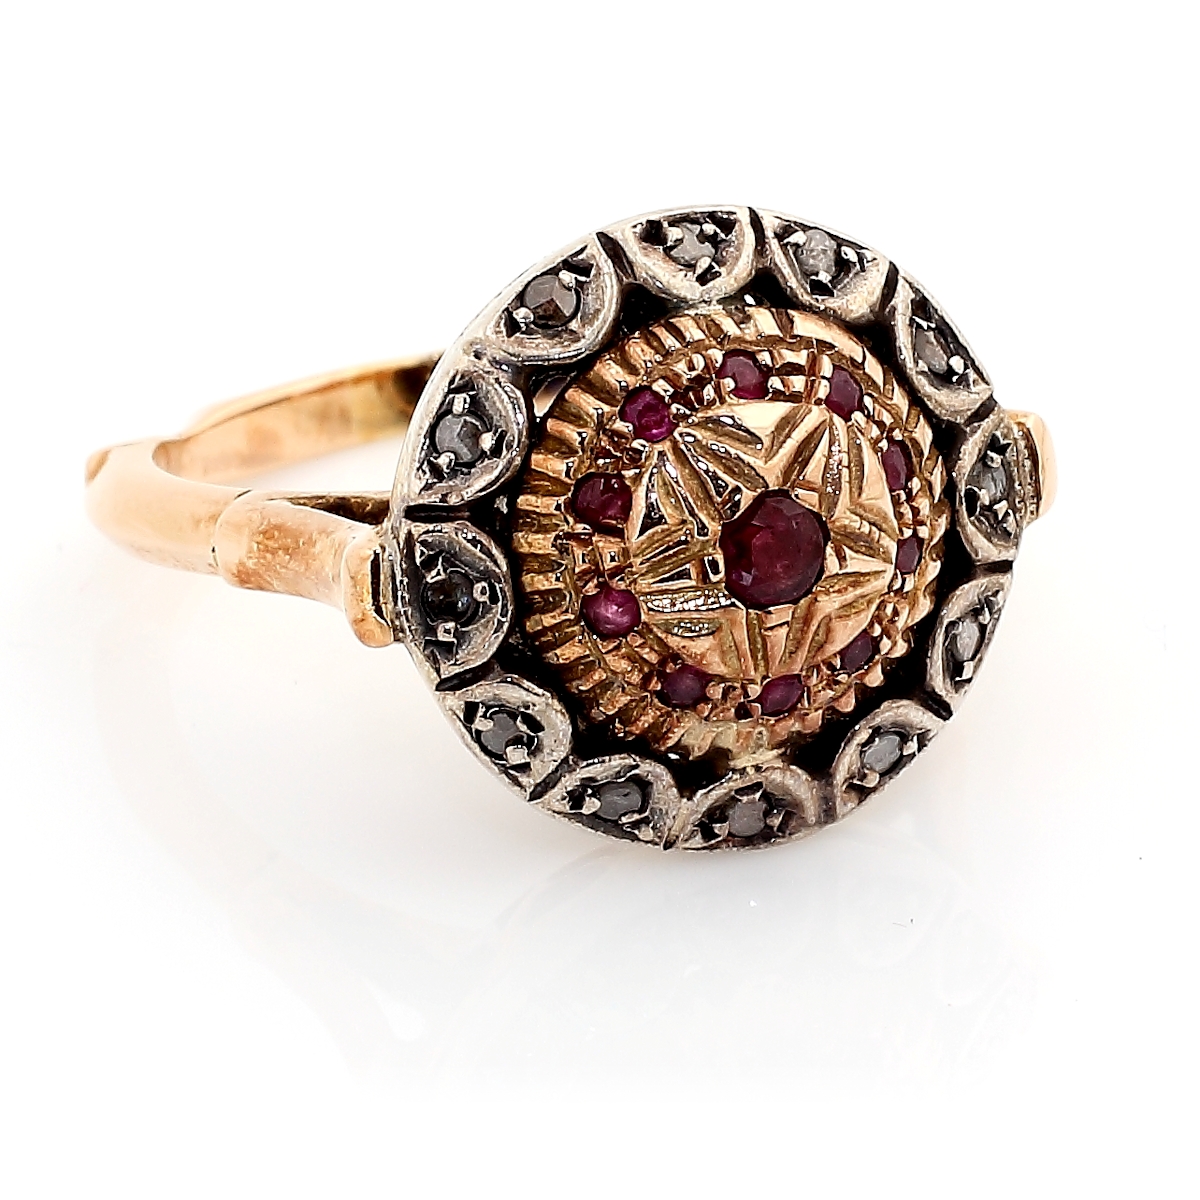 Vintage Gold Ring with Diamonds and Rubies